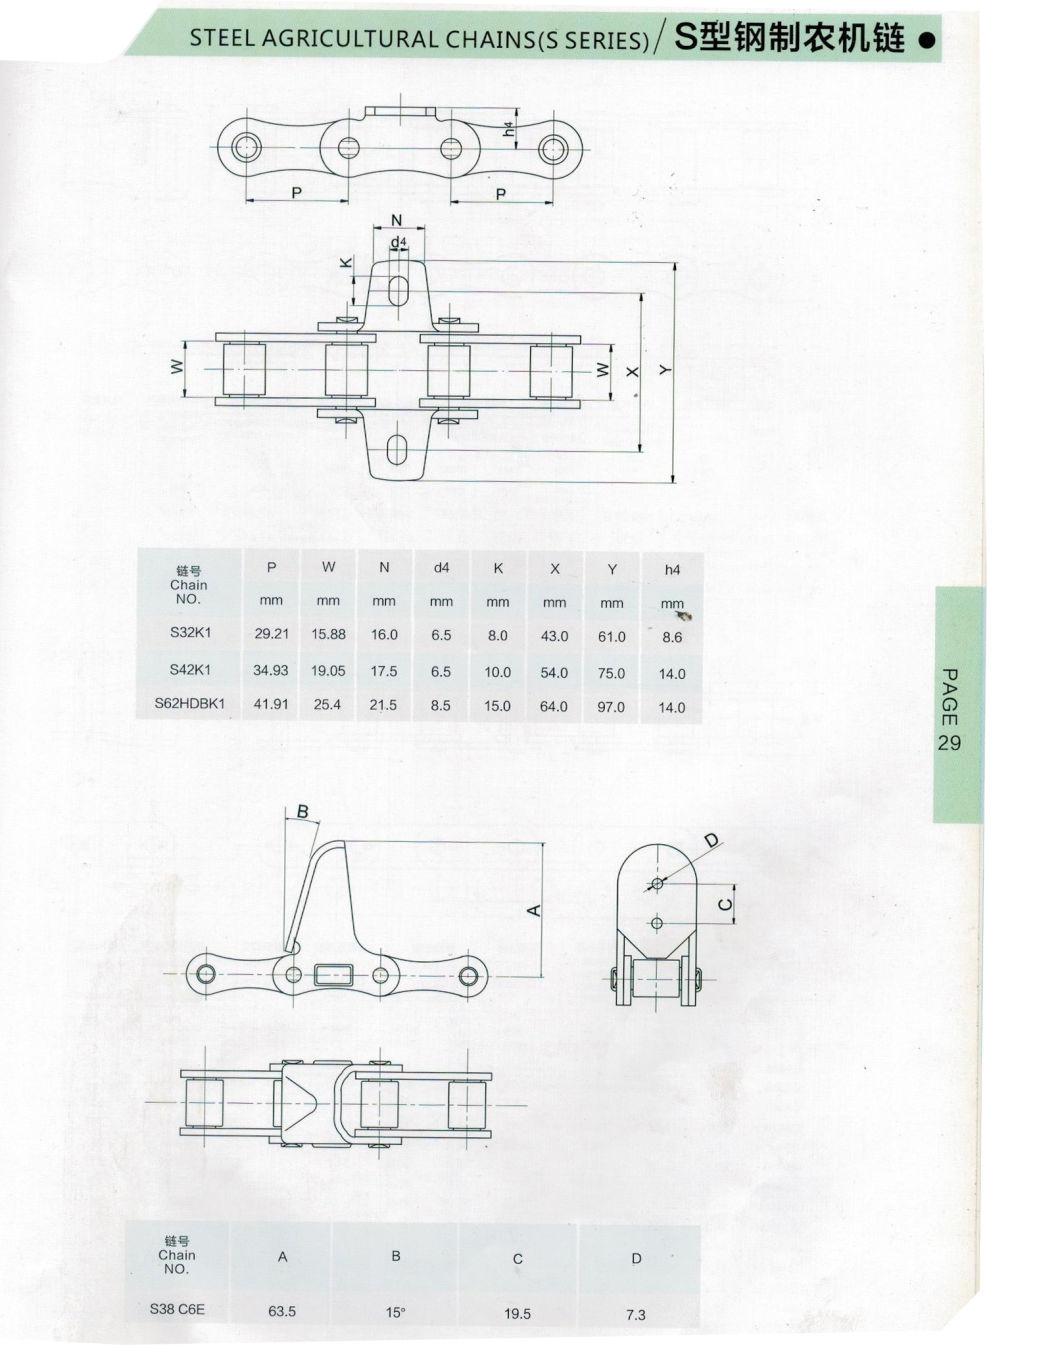 S38-C6ej-72L Agricultural Corn Harvester Roller Chain with S38f3, S38f4, S38f2, S38f1